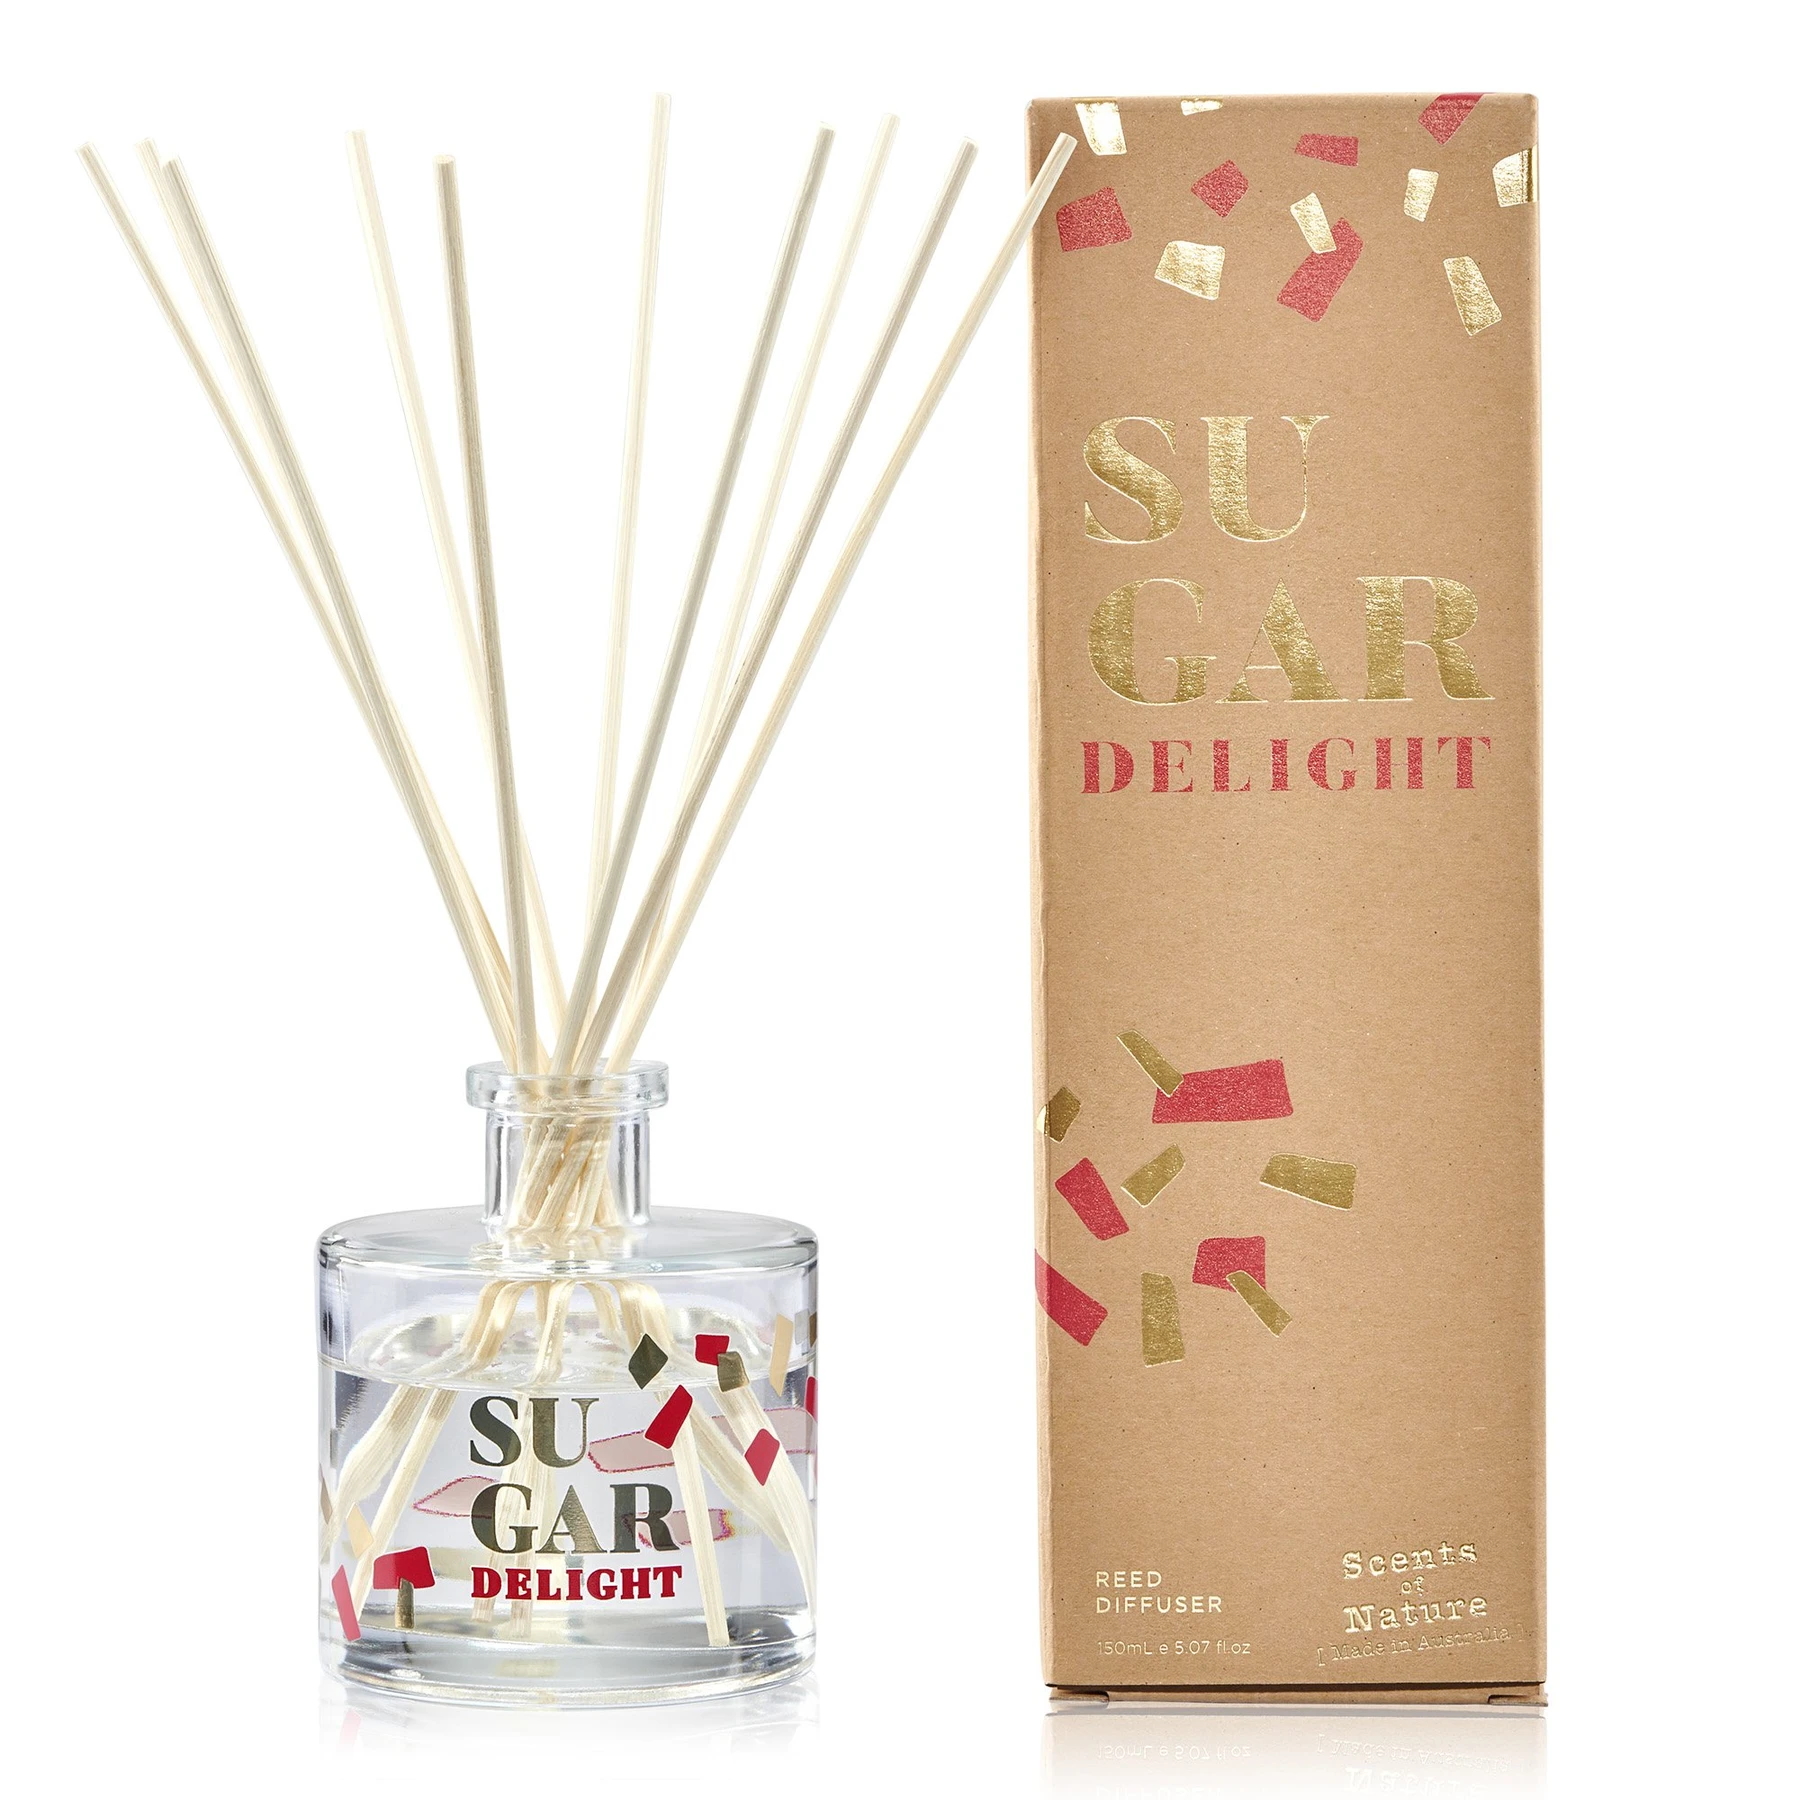 Tilley Scents of Nature Sugar Delight Reed Diffuser 150ml